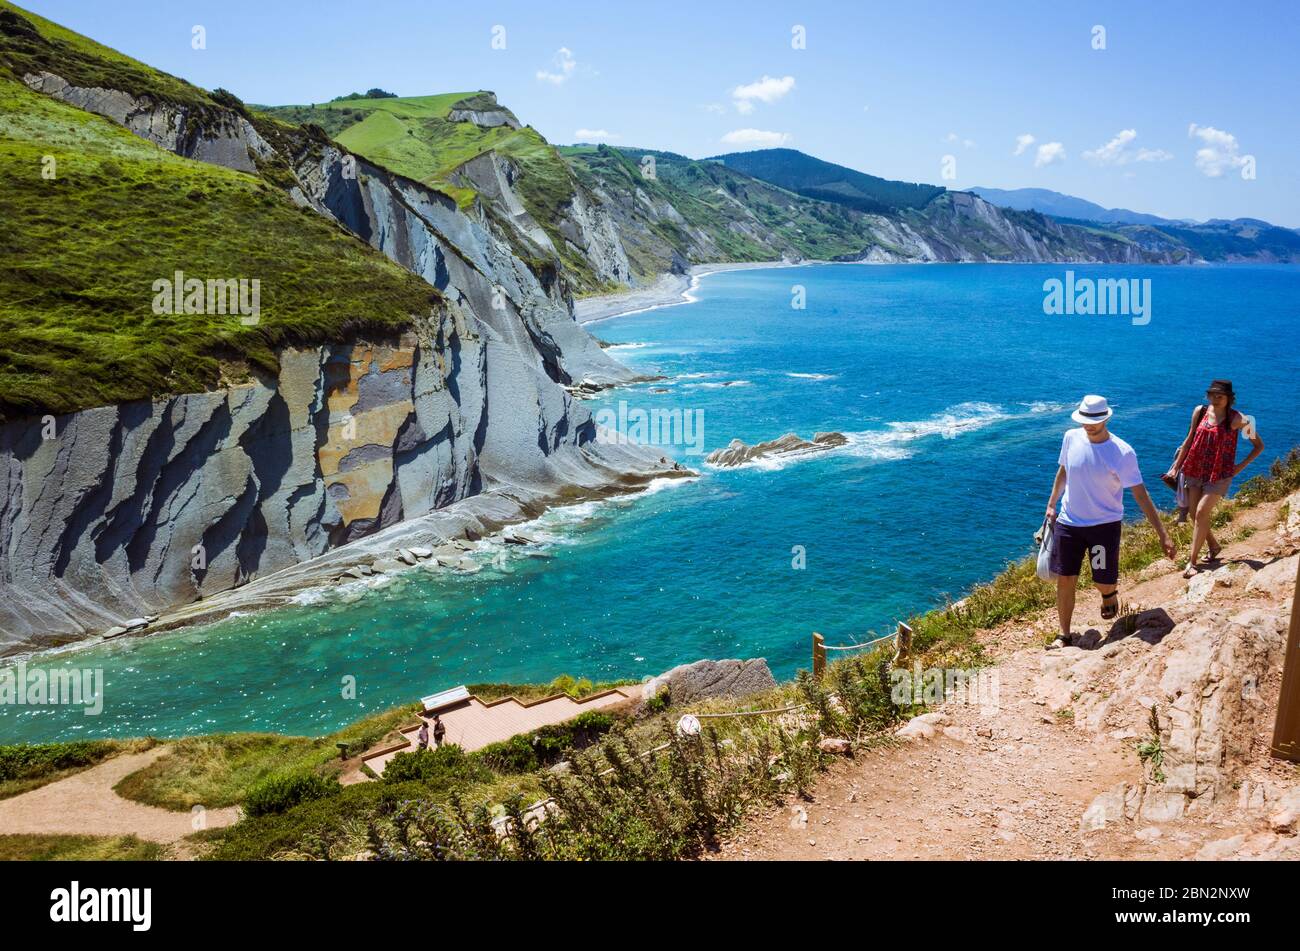 Zumaia, Gipuzkoa, Basque Country, Spain - July 15th, 2019 : Tourists hike atop the cliff made of flysch rock. Stock Photo